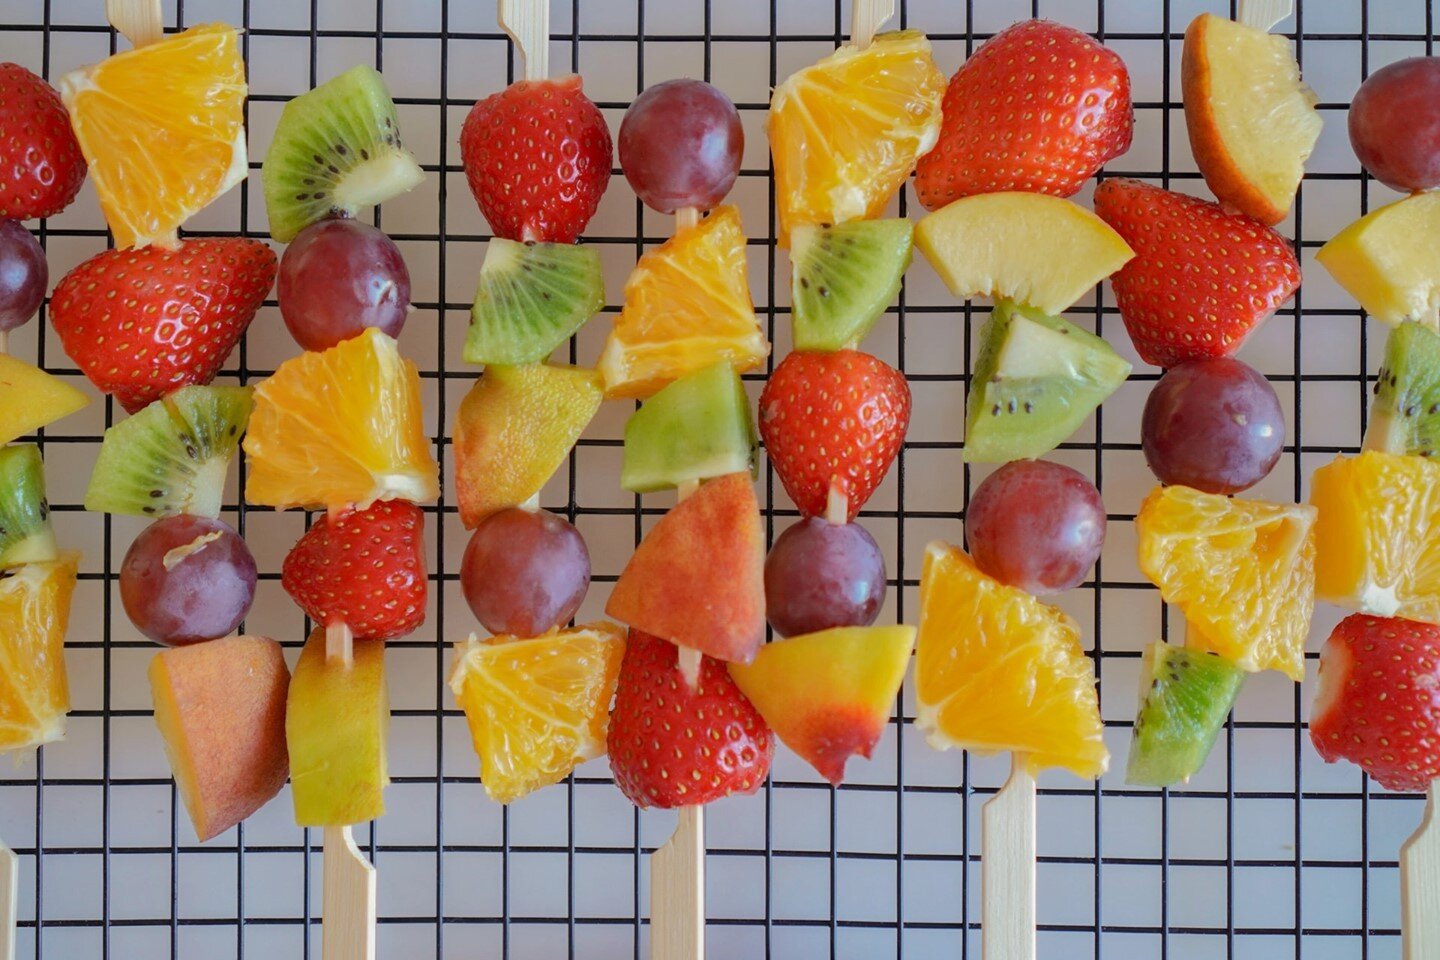 In the run up to our family cook-a-long event I'll be sharing some hints and tips on nutrition for healthy kids! 

Struggling for healthy snack ideas for the kids over the summer break?

Here's my 5 top healthy snacks ideas:

1. Rainbow fruit skewers